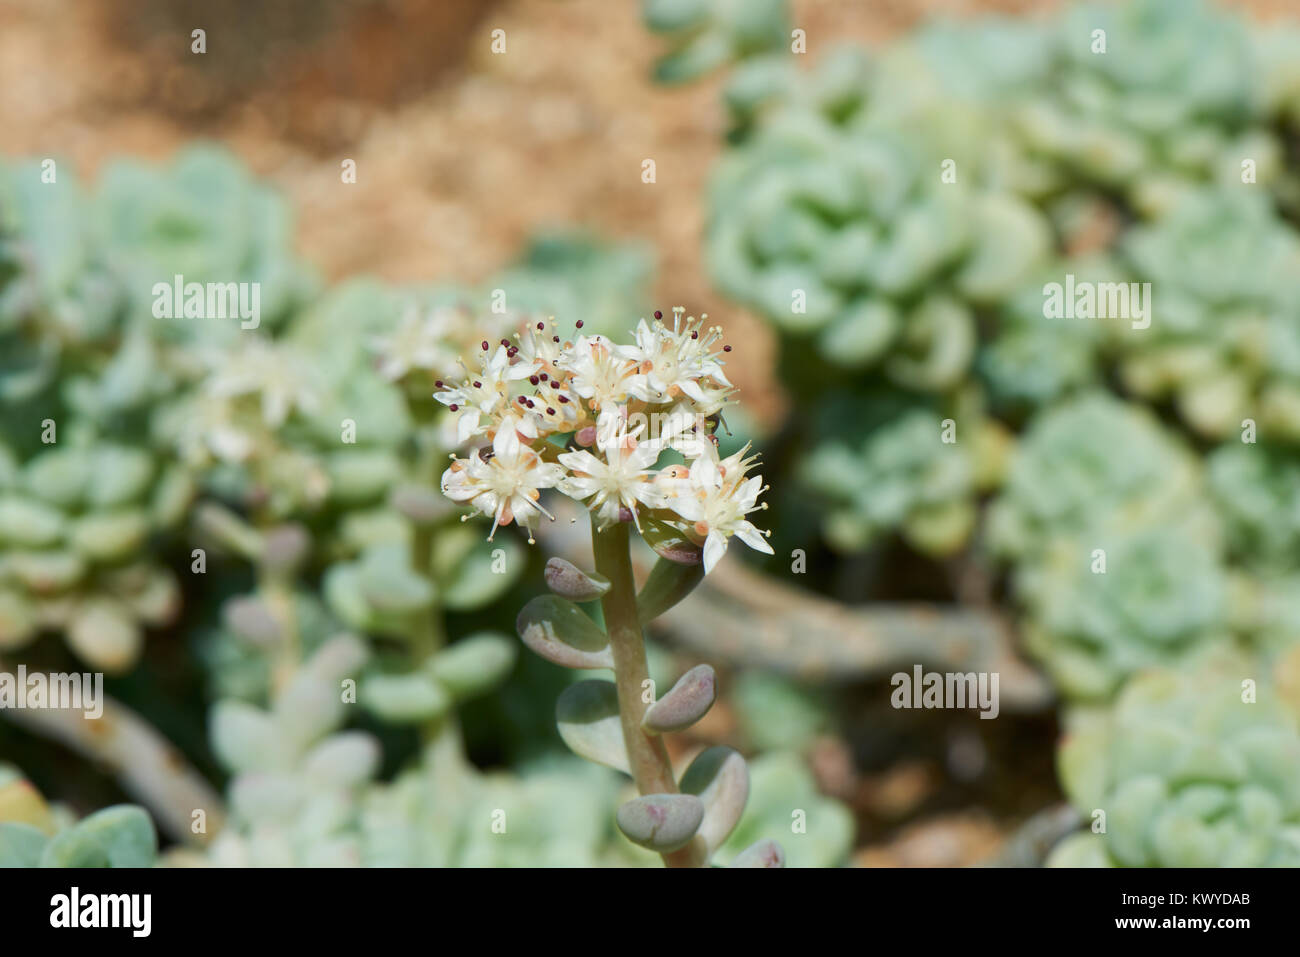 Sedum clavatum flower. S. clavatum is a succulent plant in the family Crassulaceae. It has white, star-shaped flowers in mid to late spring. Stock Photo